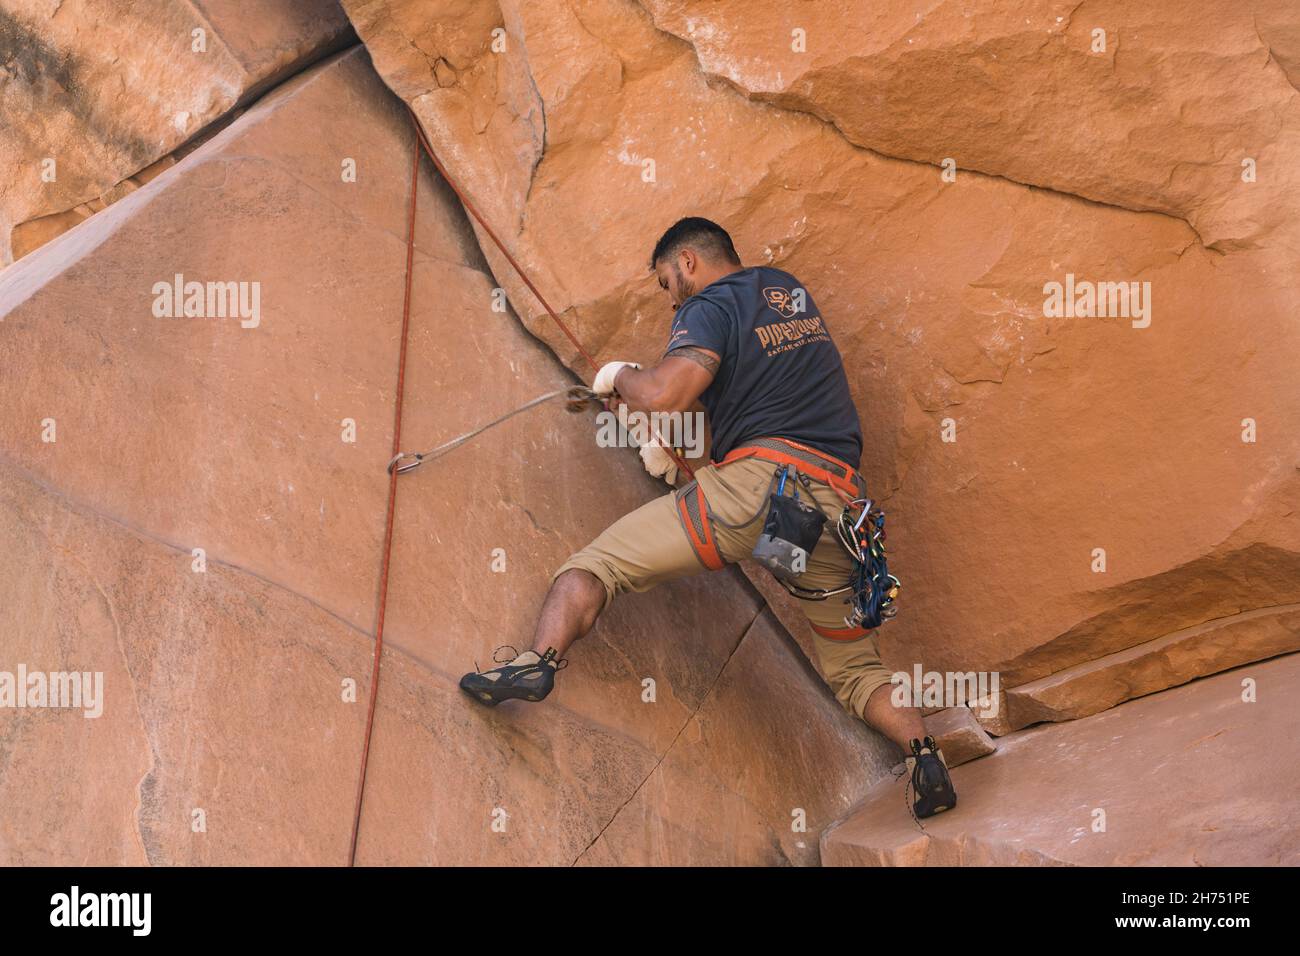 A climber on the difficult Bad Moki Roof route in the Wall Street climbing area, Moab, Utah. Stock Photo